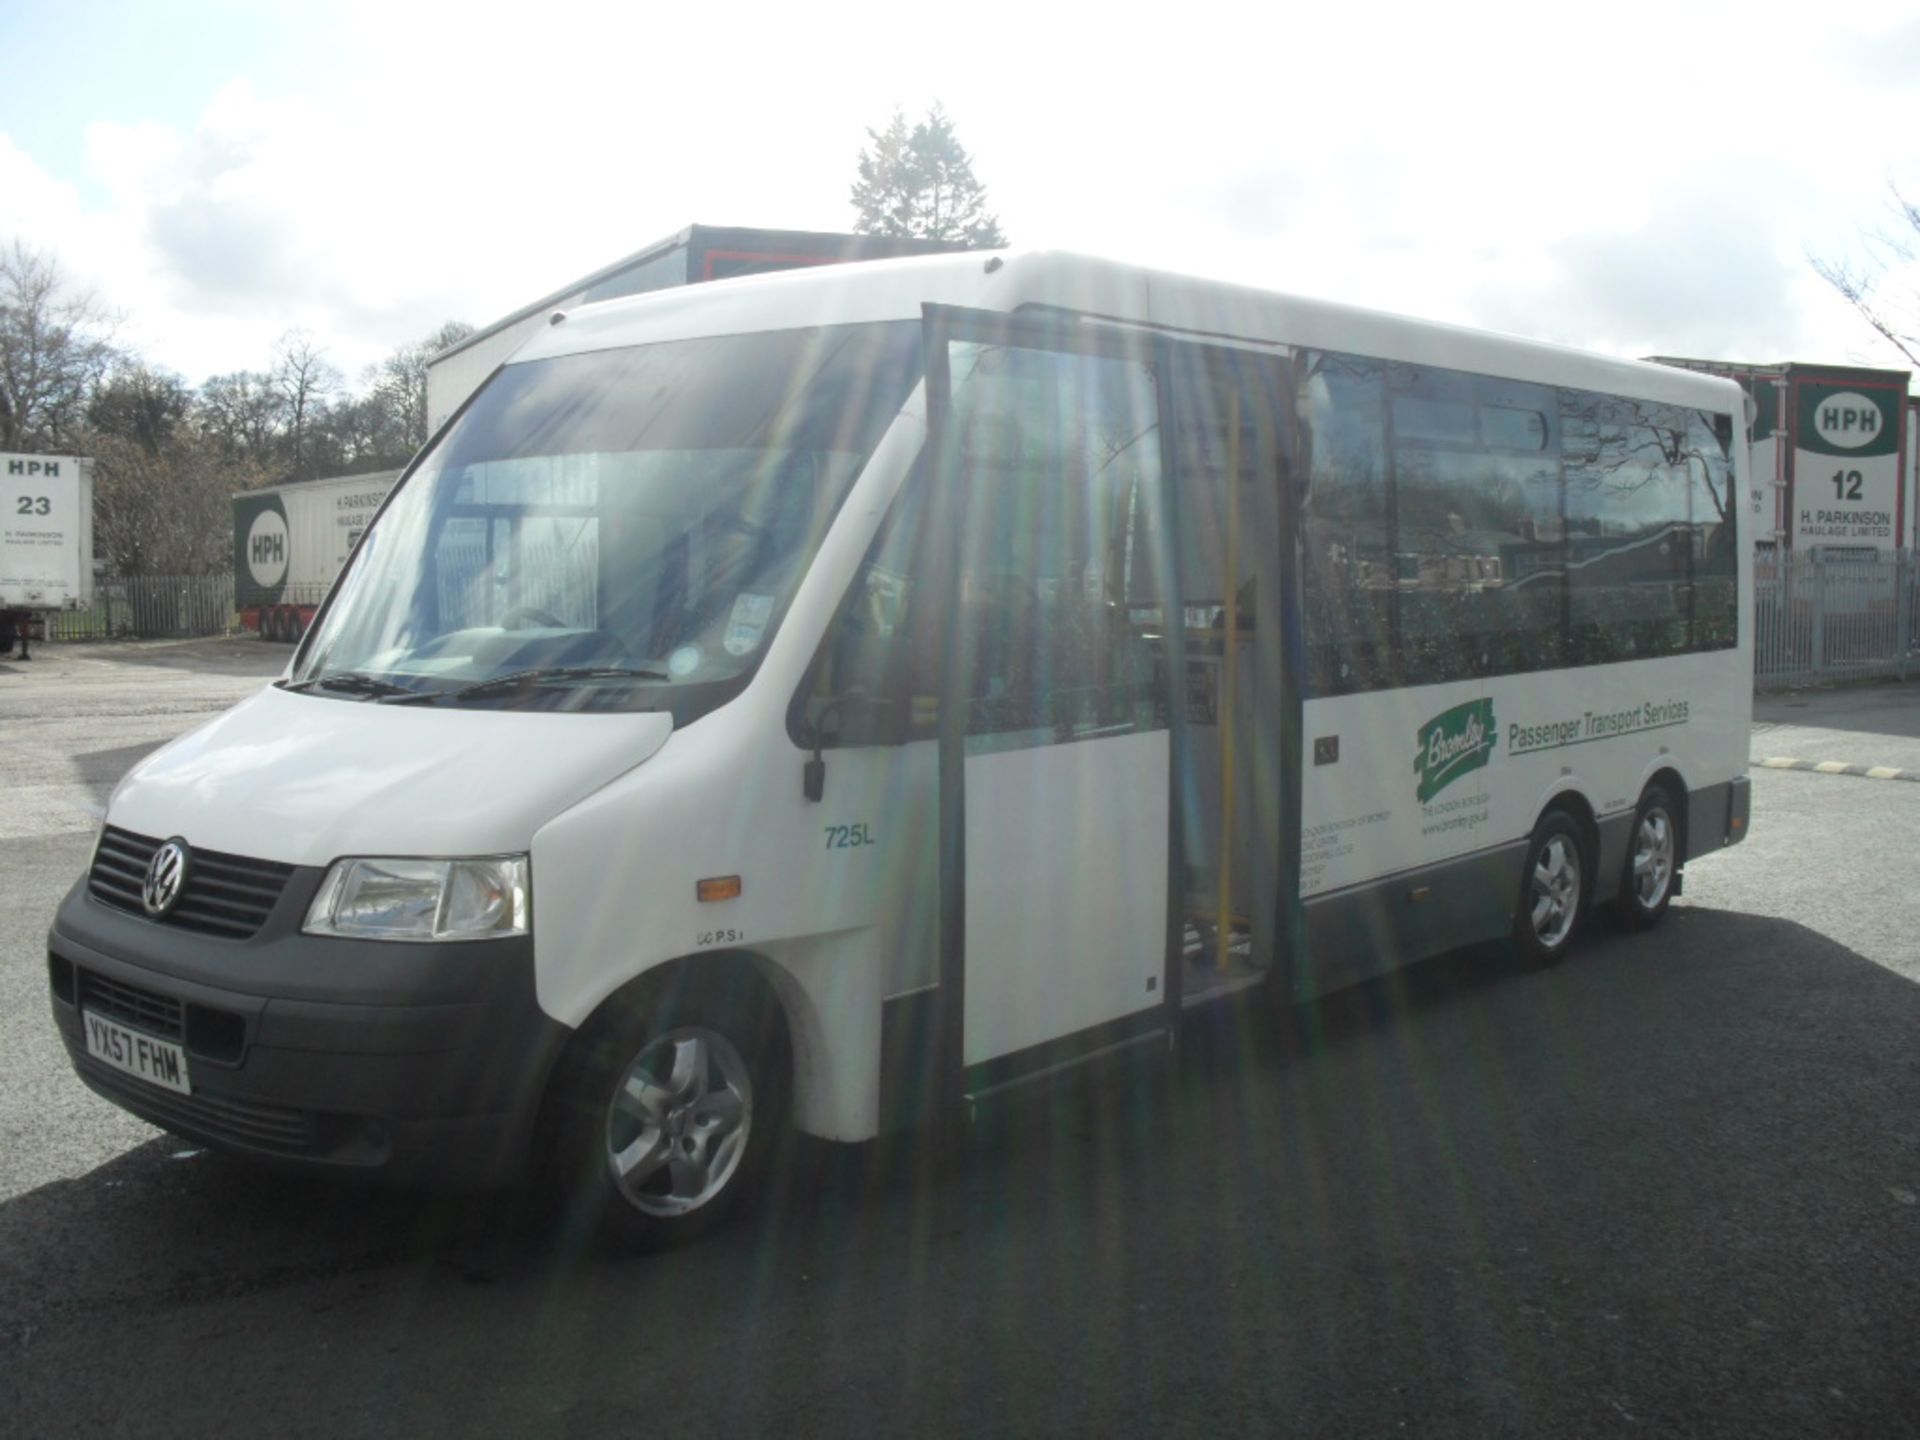 2007 VW Transporter based 12 seater mini bus with disabled access ramp. - Image 3 of 19